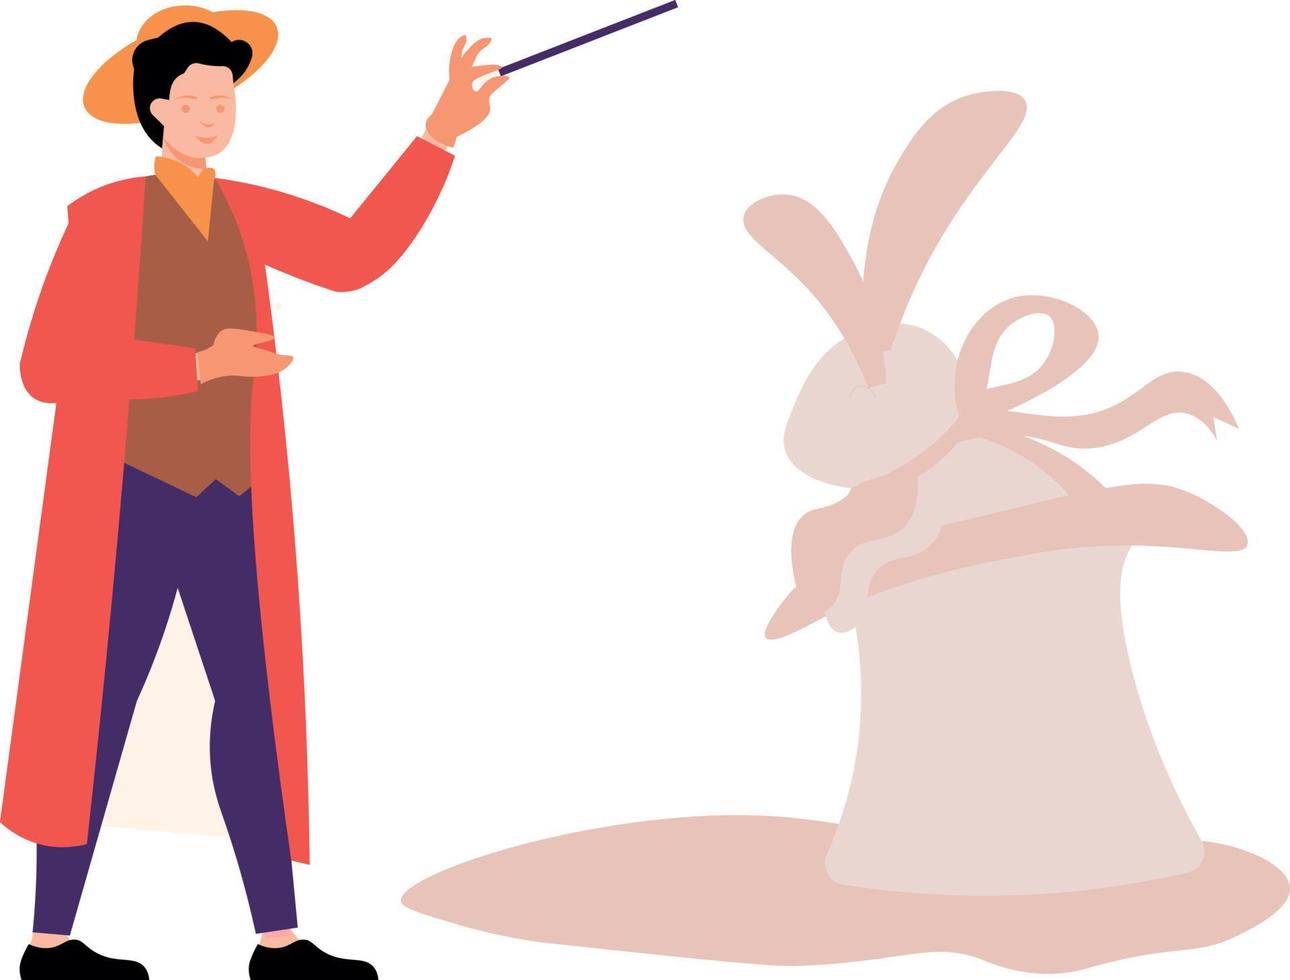 The magician is doing the rabbit hat trick. vector